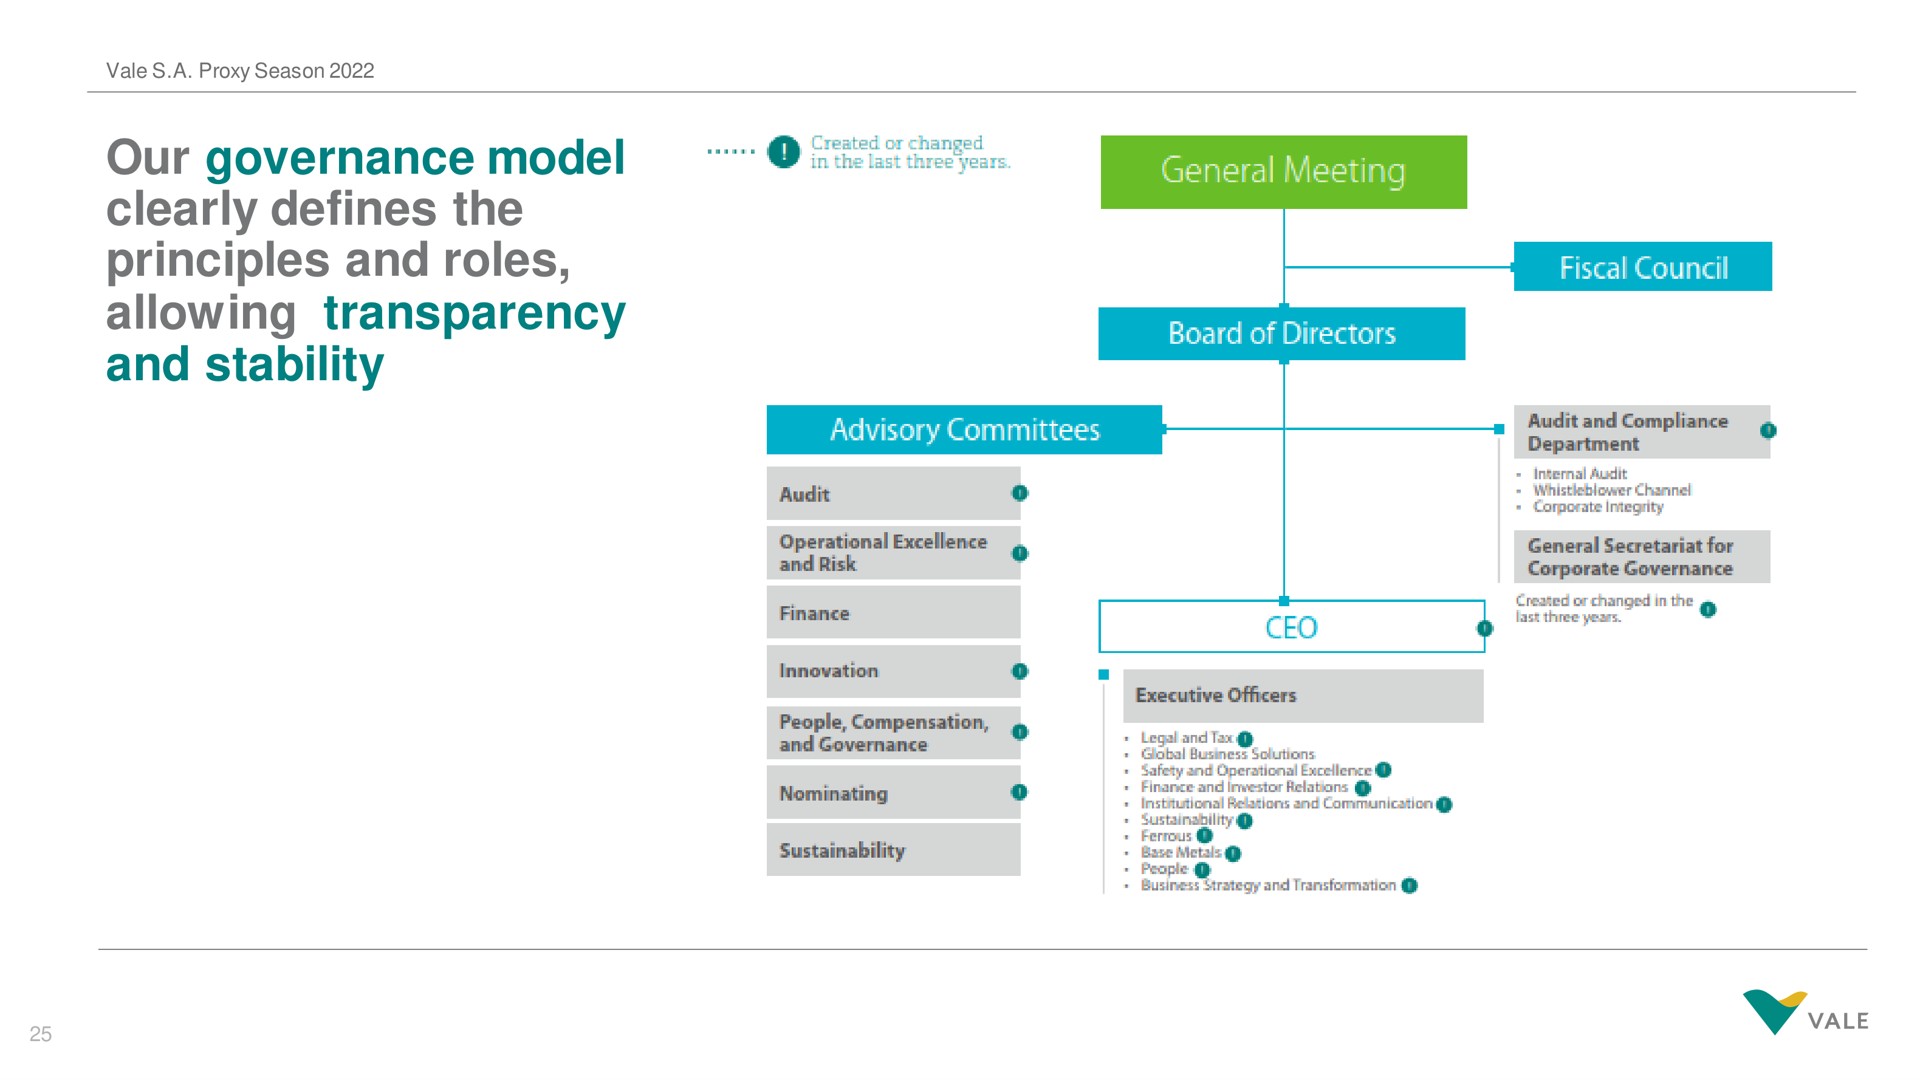 our governance model clearly defines the principles and roles allowing transparency and stability enol crea are | Vale